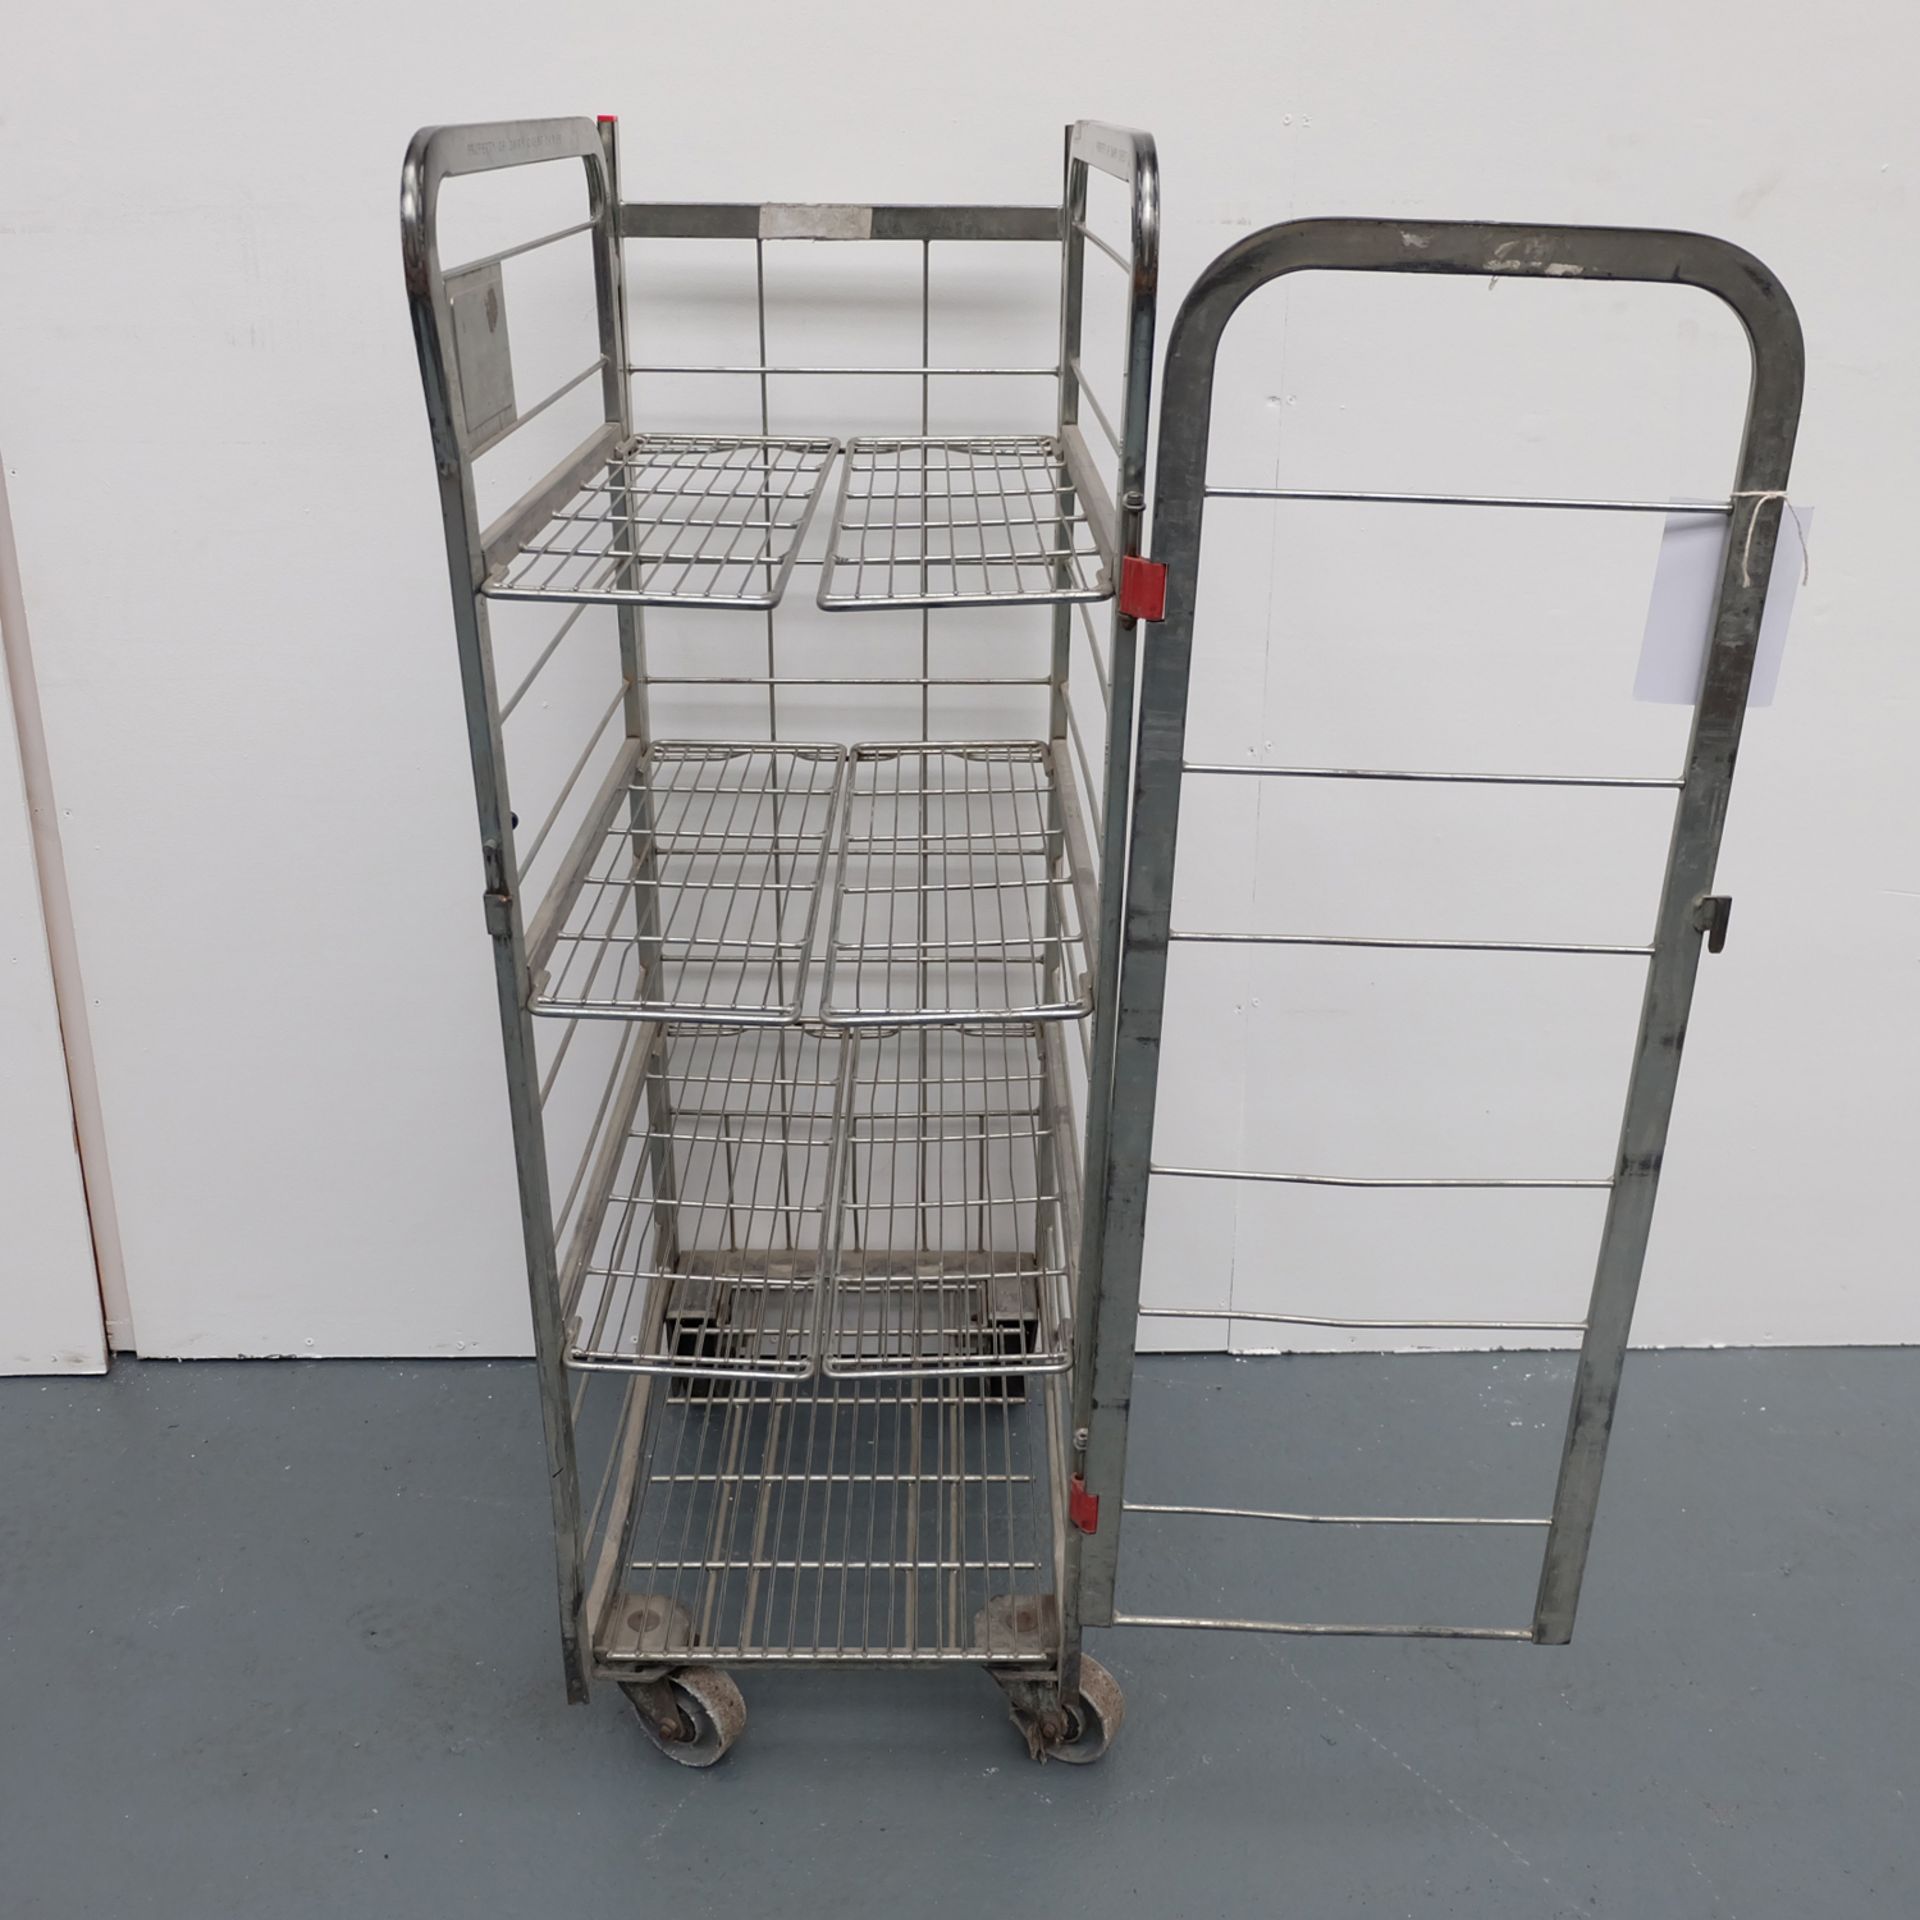 Cage on Castors. Approx 440mm x 670mm x 1280mm High. - Image 4 of 4